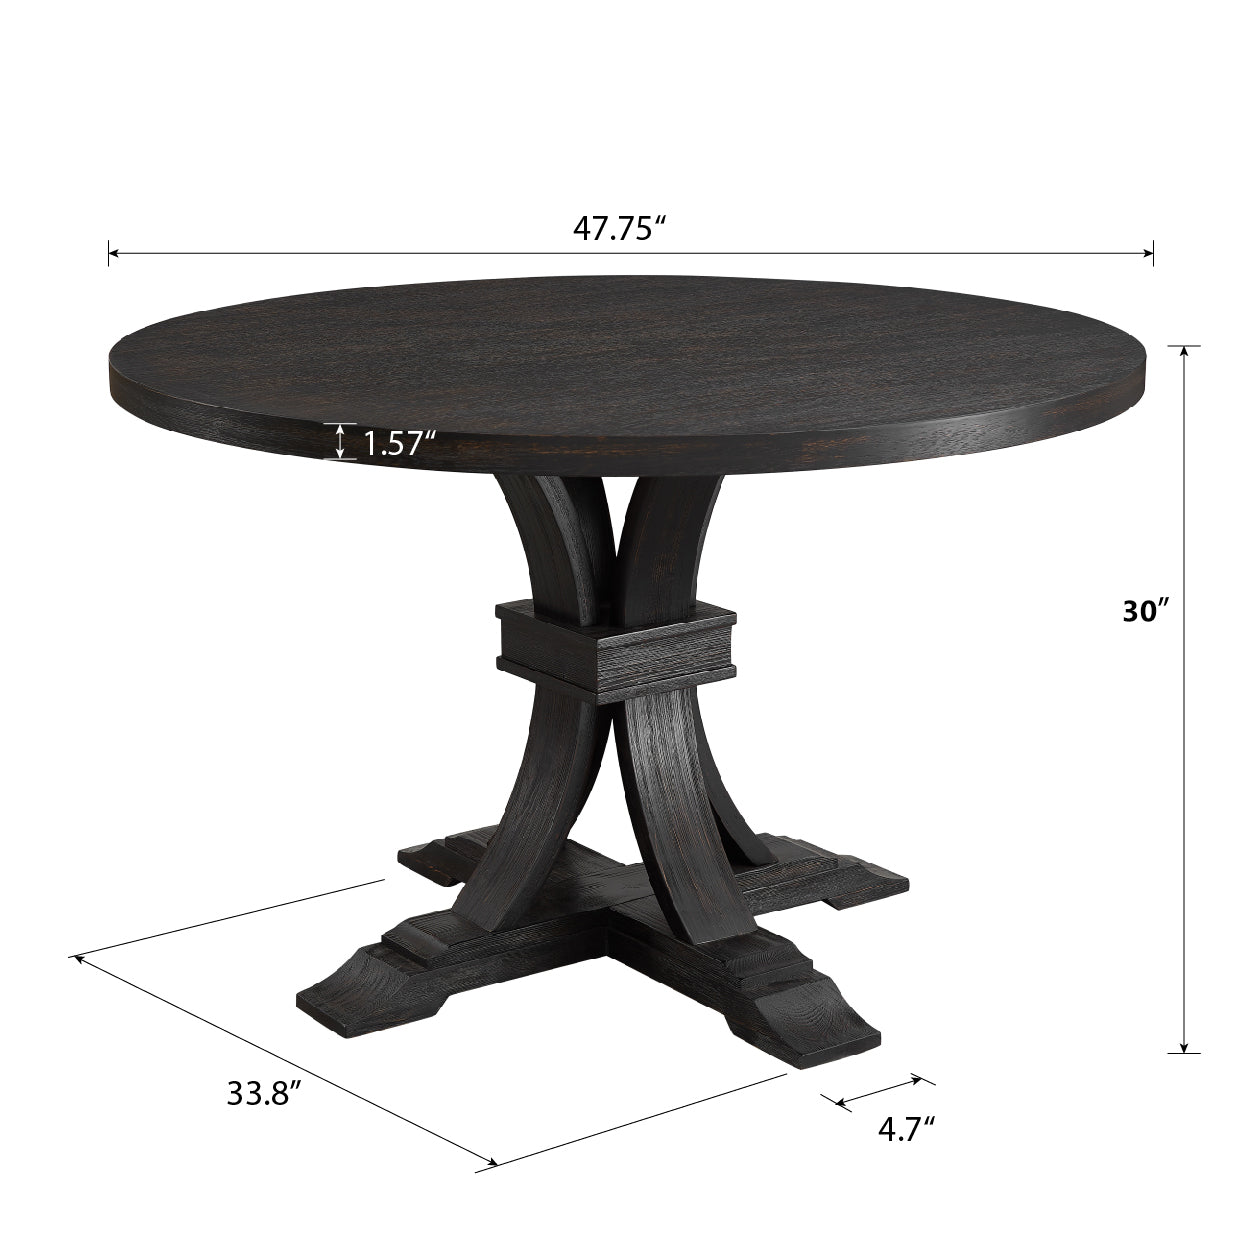 Distressed Black Finish Round Pedestal Dining Table